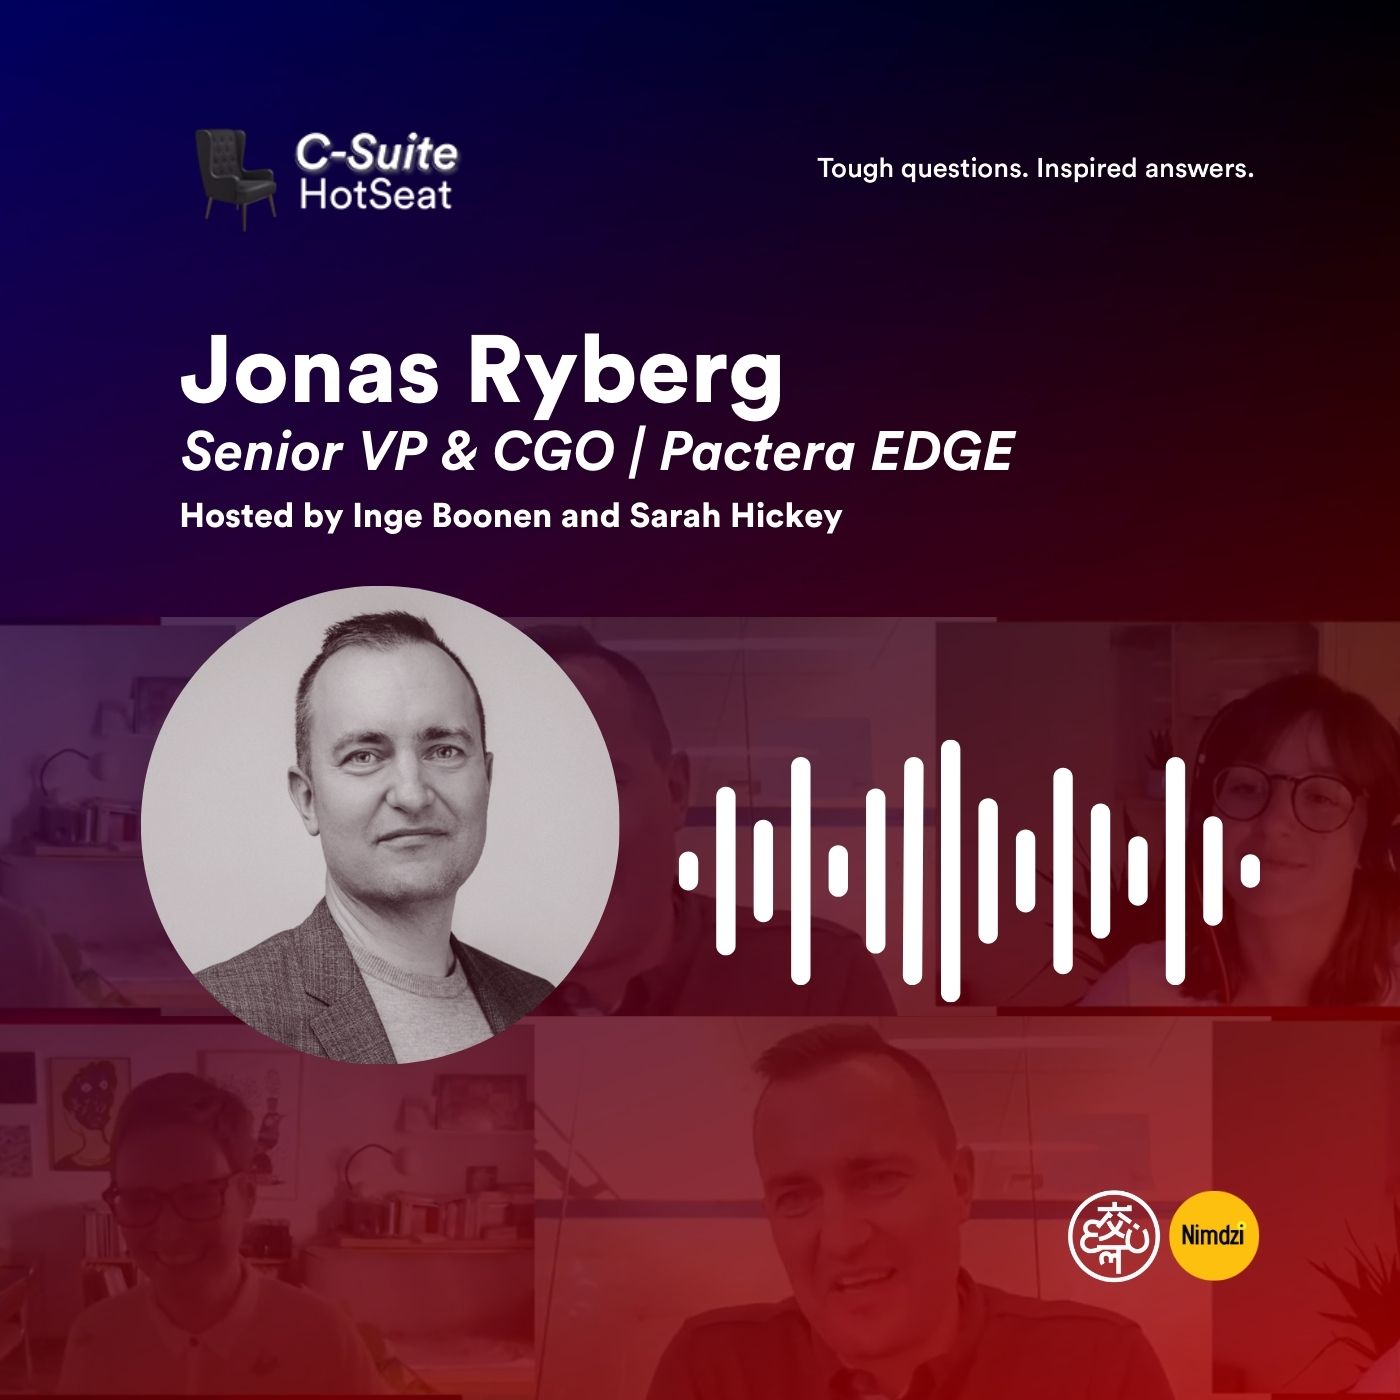 The Power of Culture, Coaching and Contemplating with CGO Jonas Ryberg | C-Suite HotSeat E05